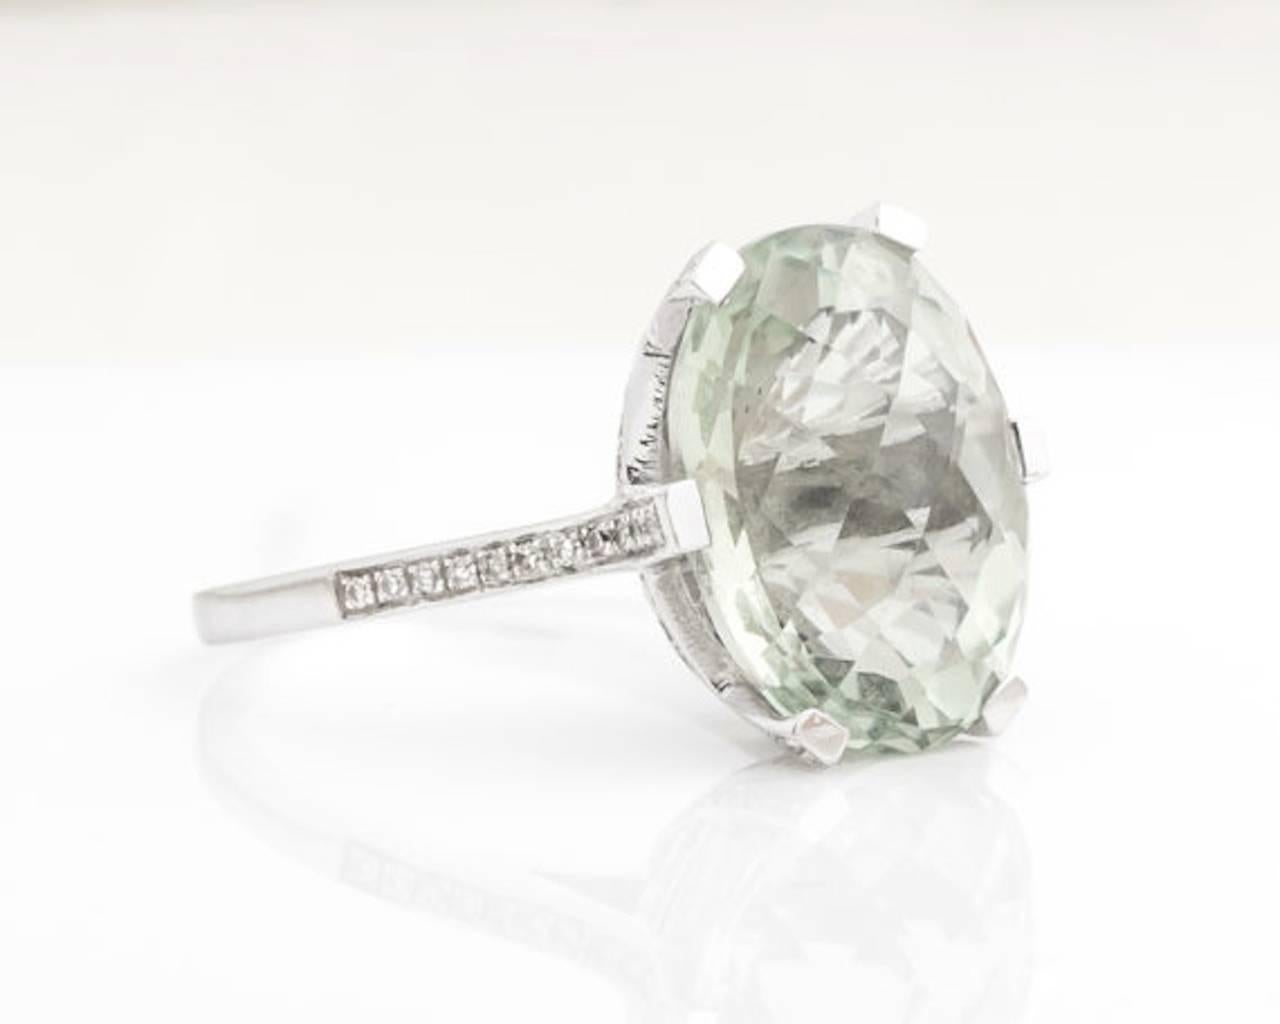 1960s Regal Prasiolite and Diamond Cathedral Cocktail Ring. Features a Prasiolite stone set in a six-prong frame with diamonds along the frame and into the shoulder. The diamonds continue around the basket of the head mount in a web design on the